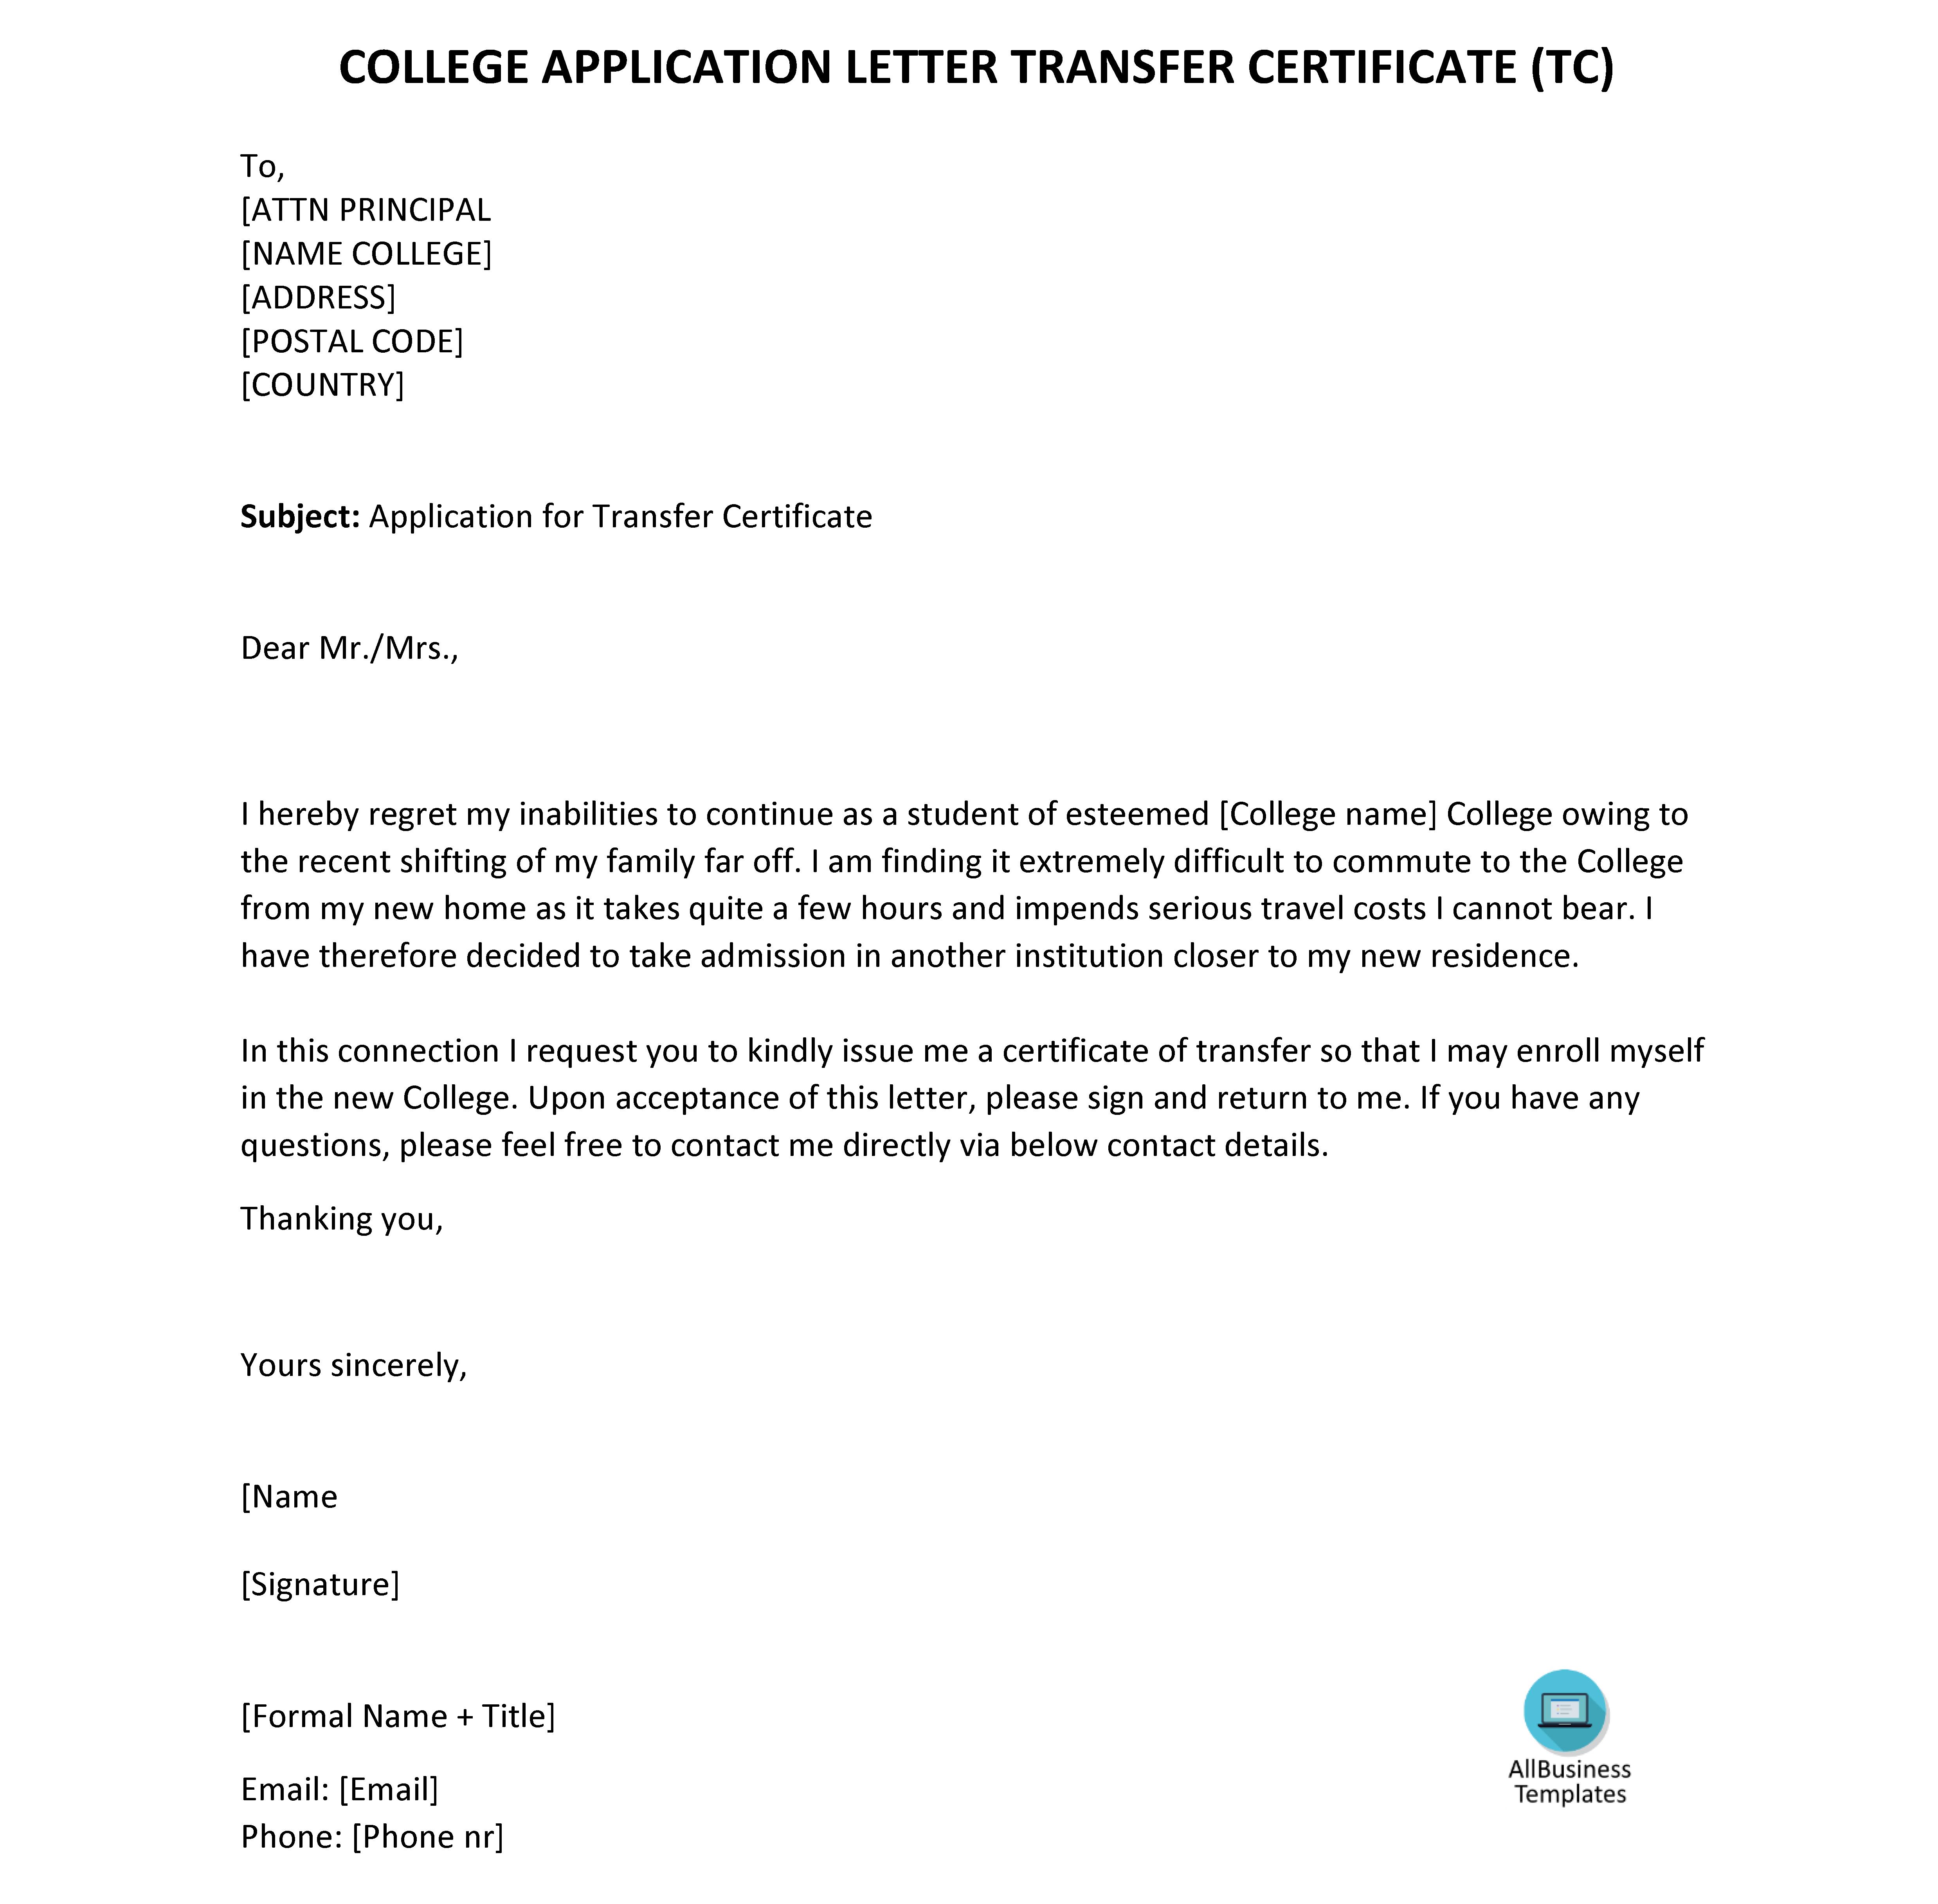 how to write an application for transfer certificate from school